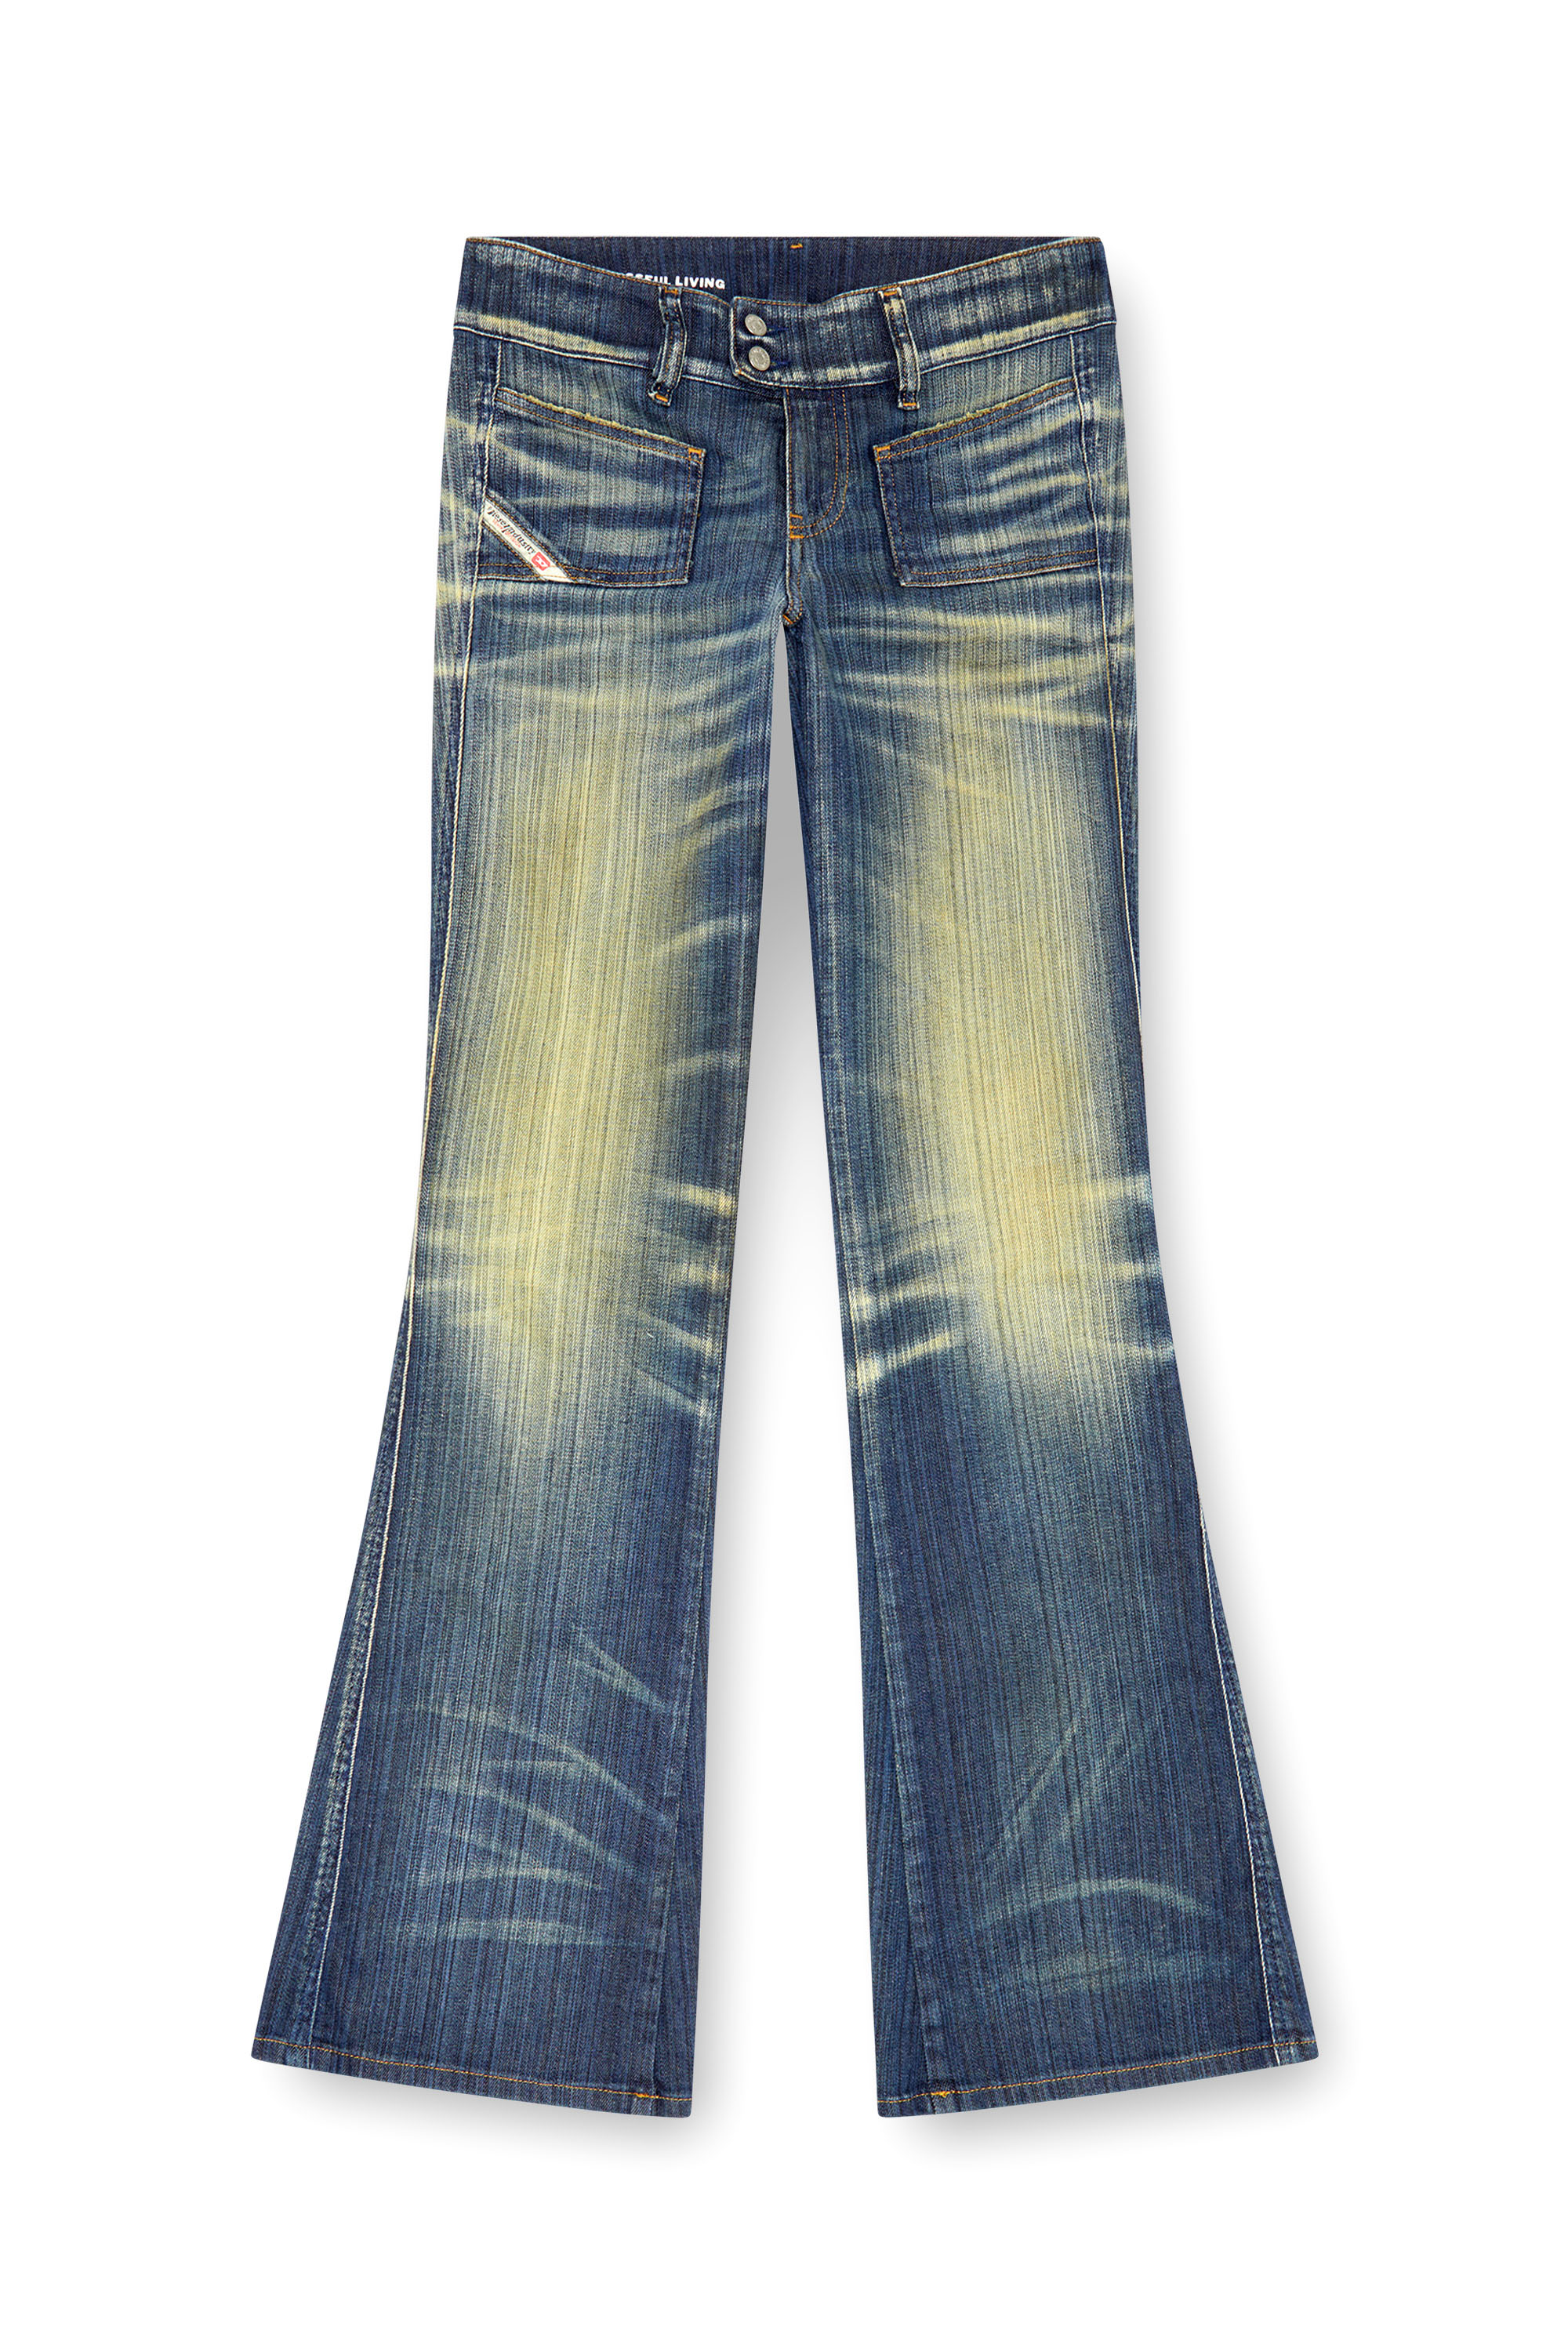 Diesel - Bootcut and Flare Jeans D-Hush 09J46, Mujer Bootcut y Flare Jeans - D-Hush in Azul marino - Image 3